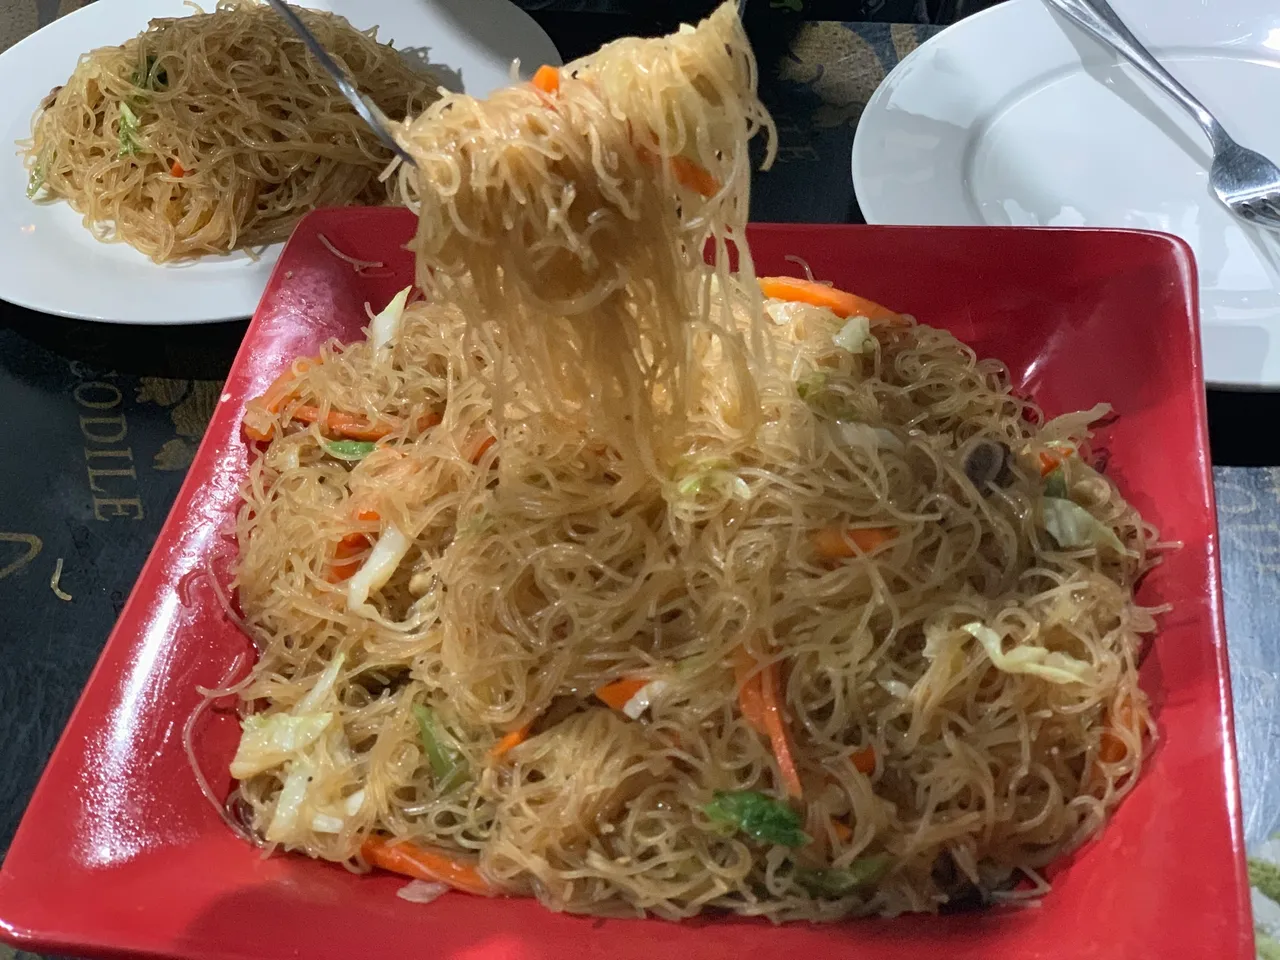 A red plate topped with noodles and vegetables.